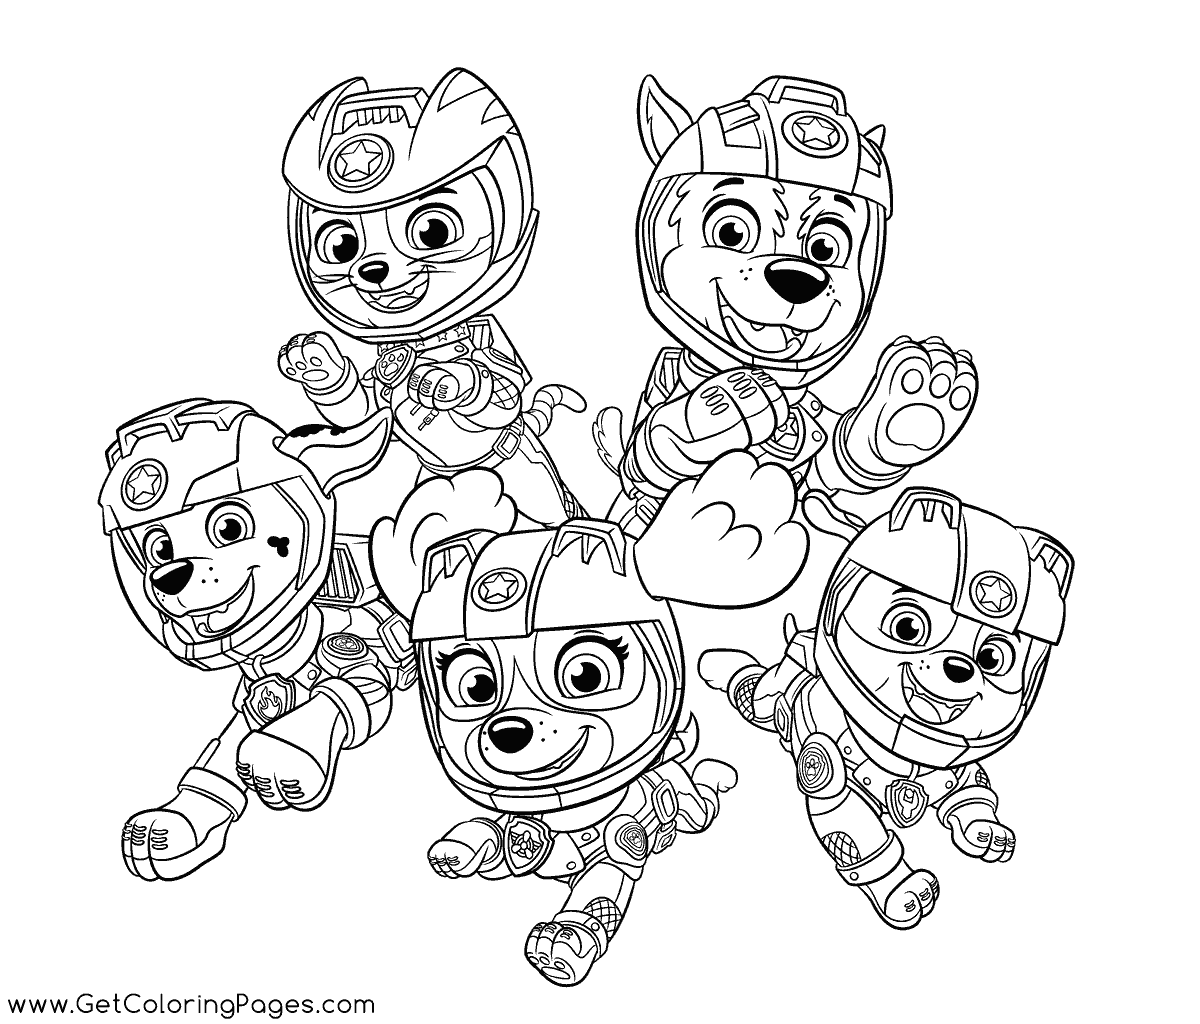 Free Printable Paw Patrol Mighty Pups Coloring Pages